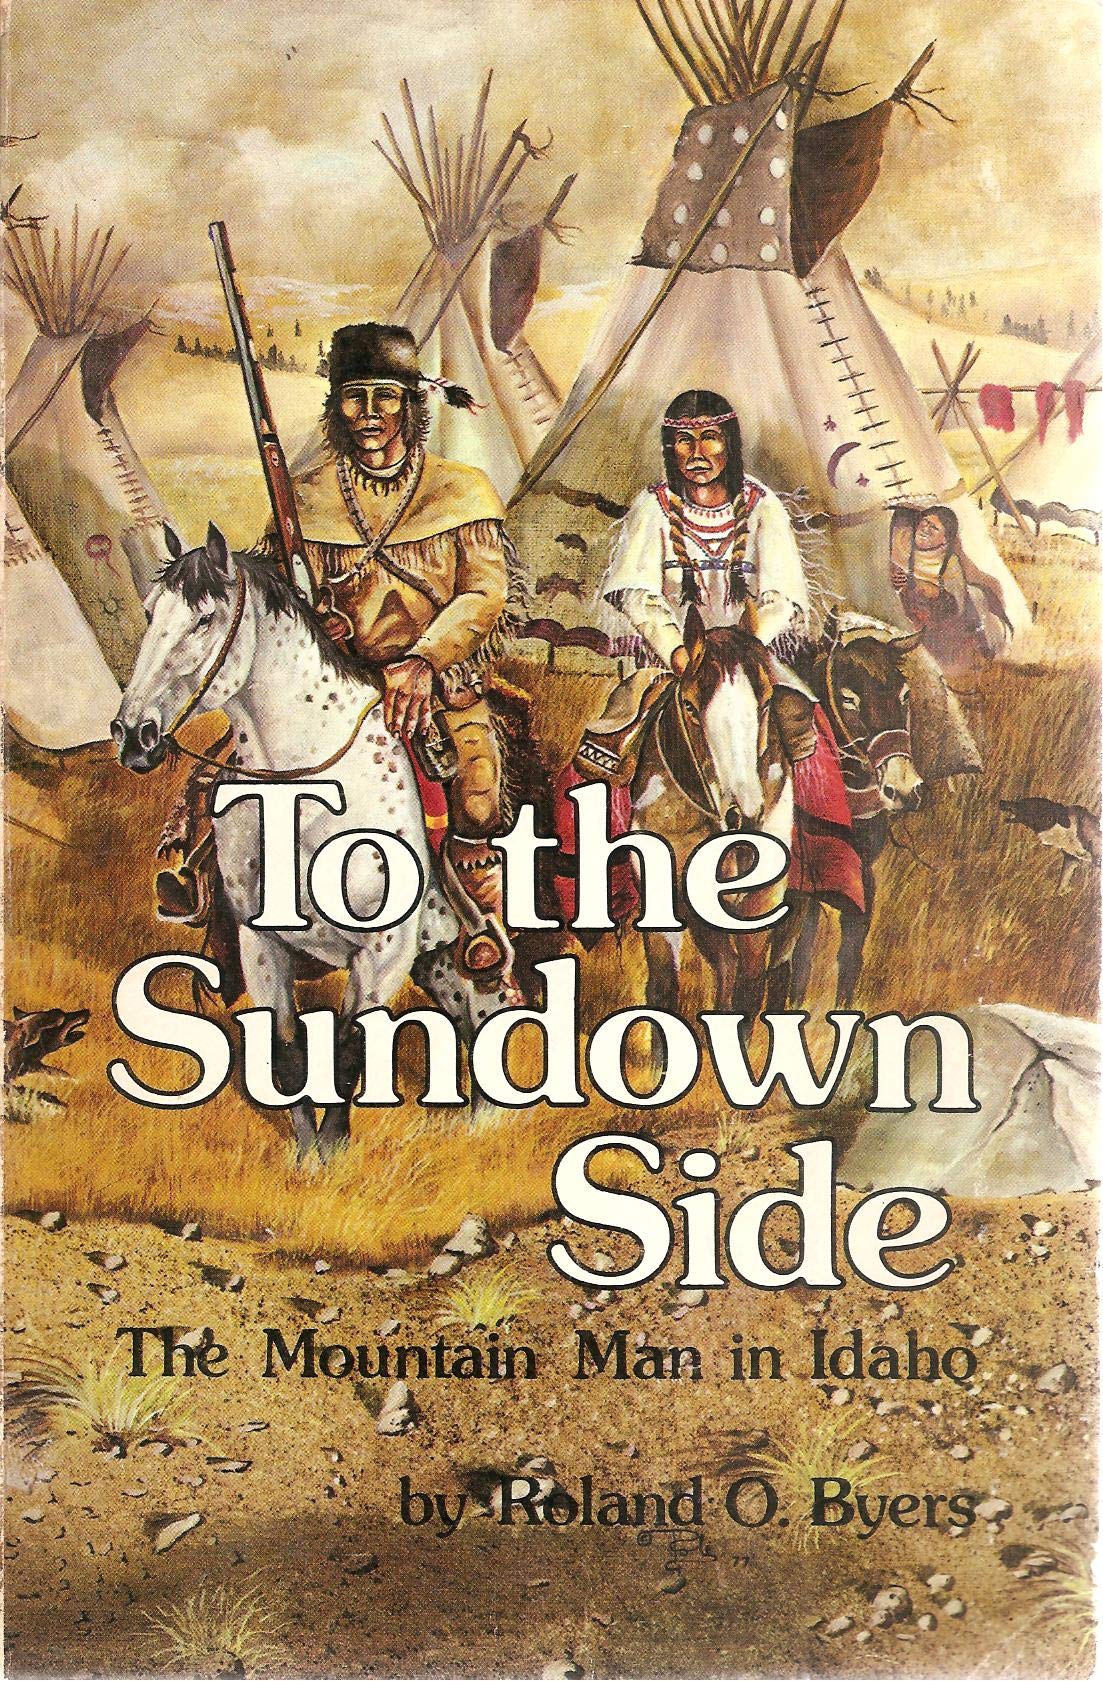 To the sundown side: The mountain man in Idaho (book cover)